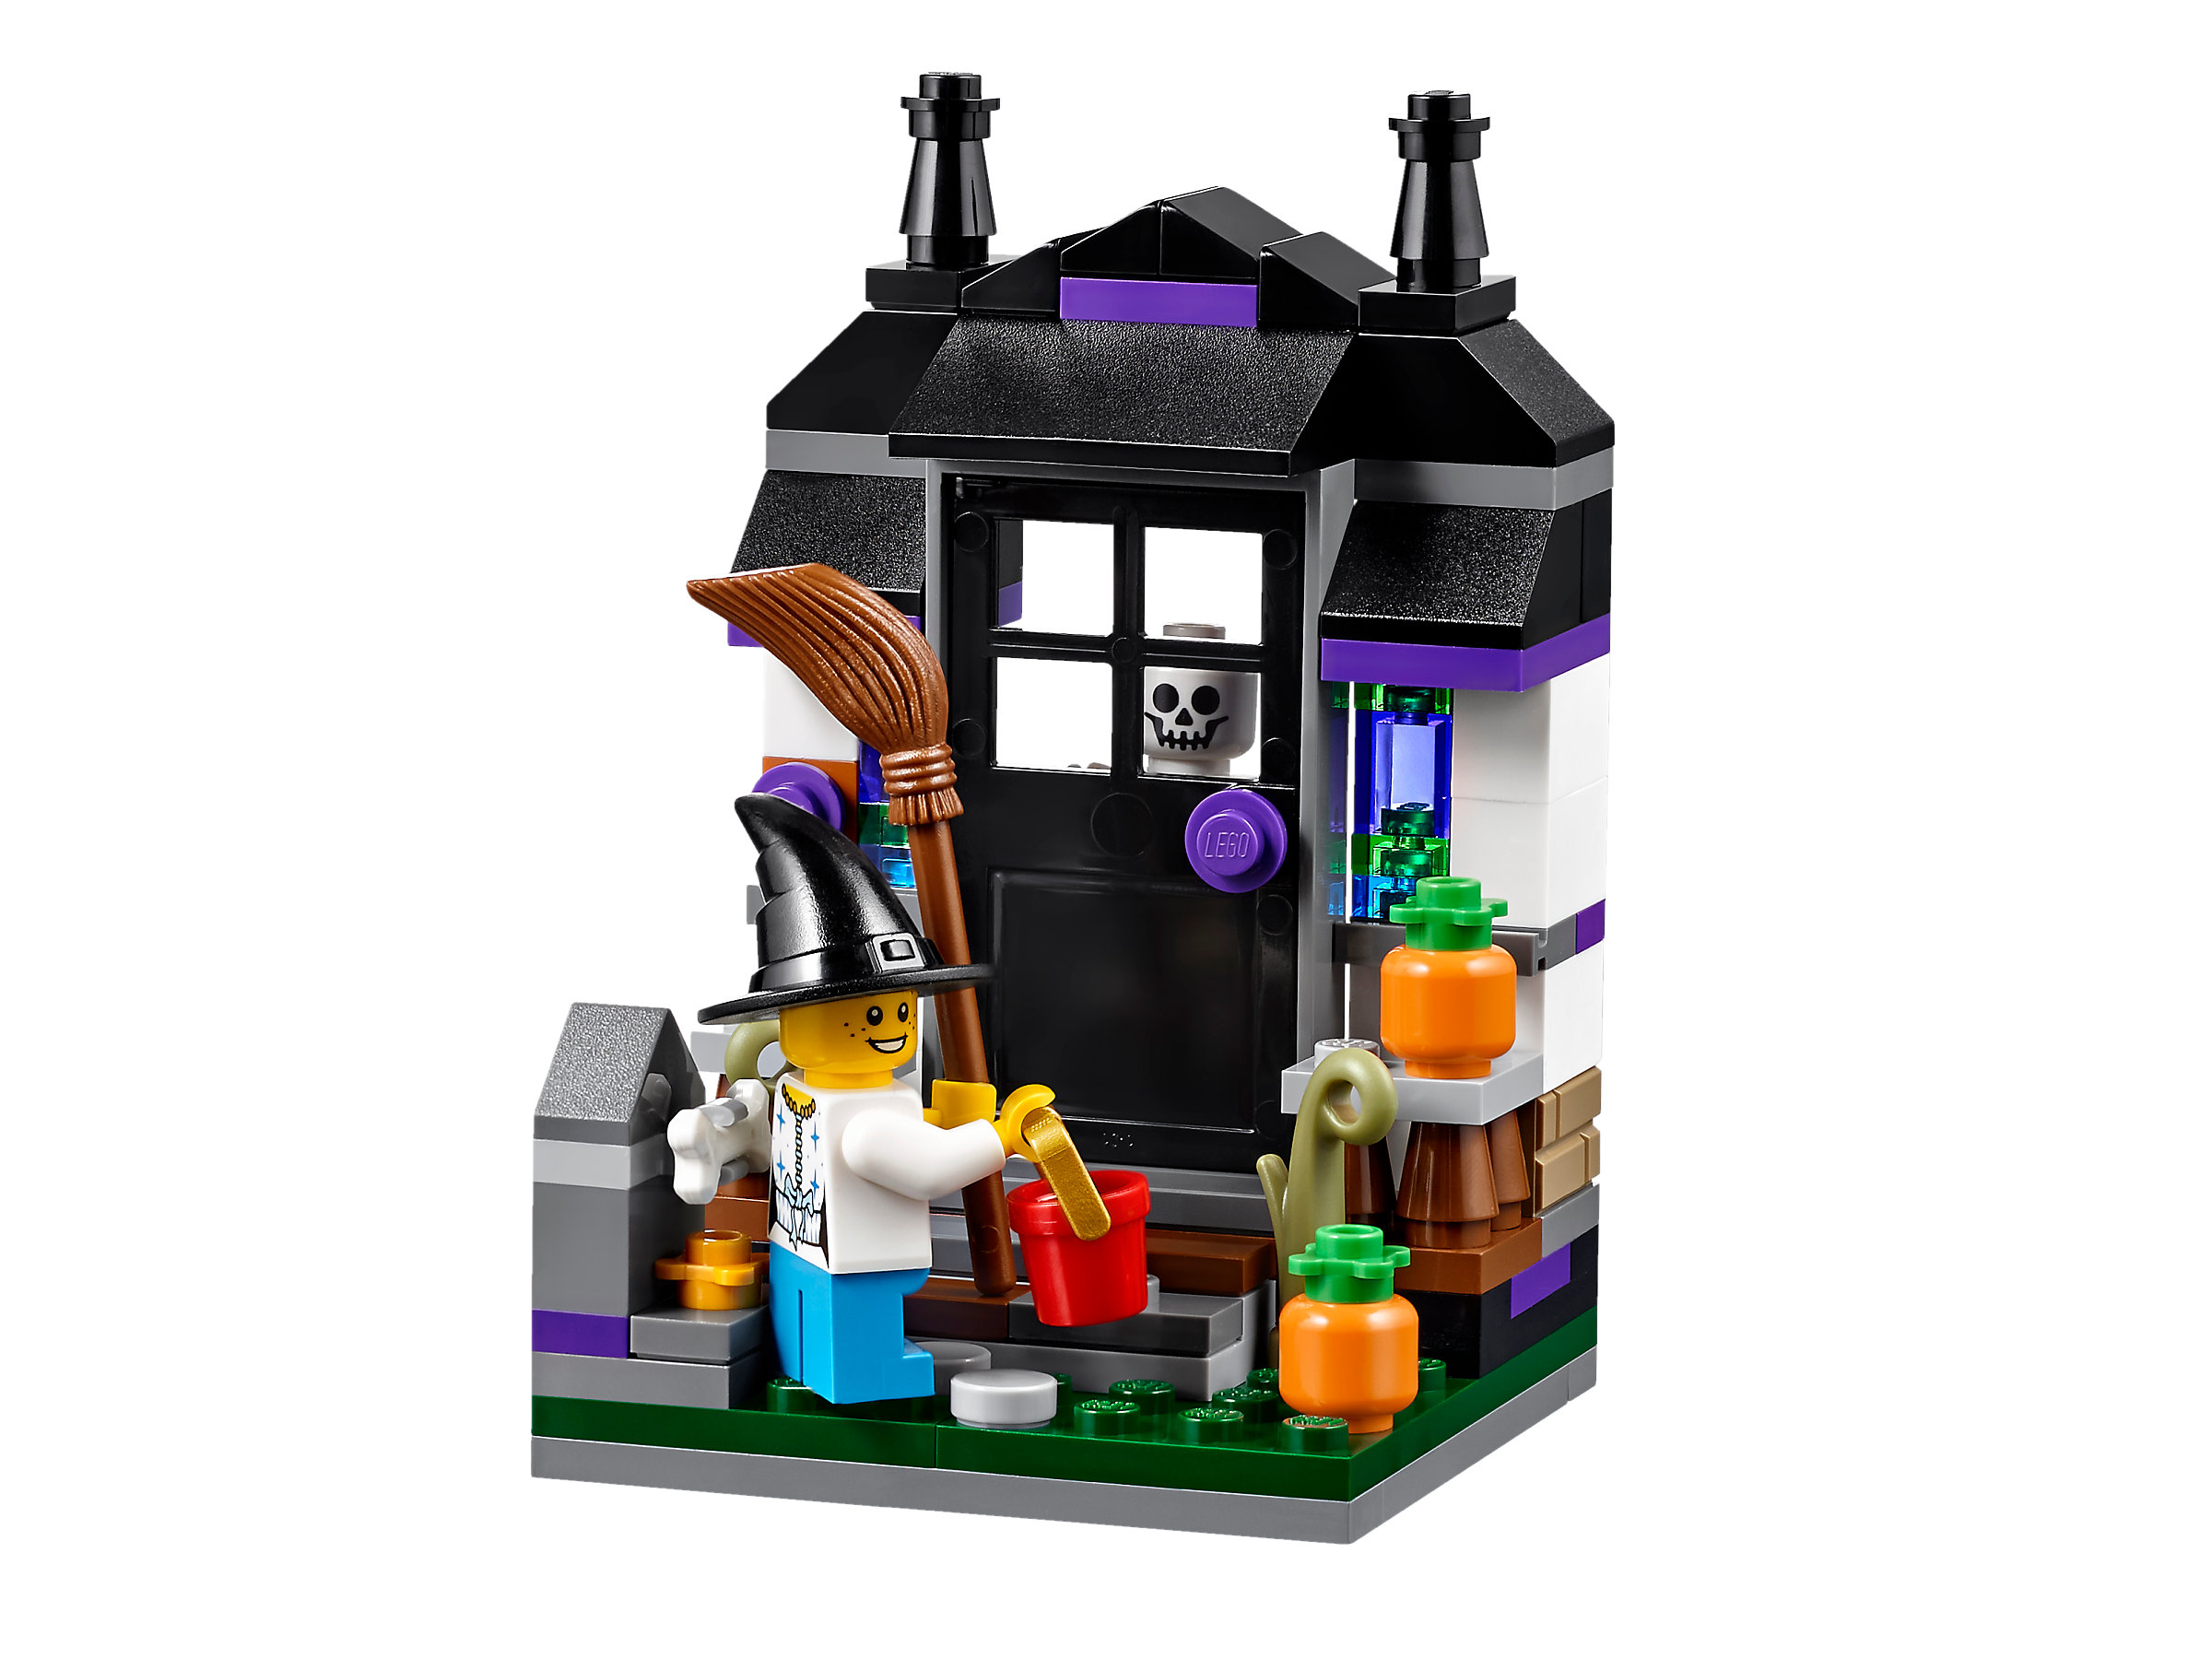 Construction manual:Trick or Treat 40122